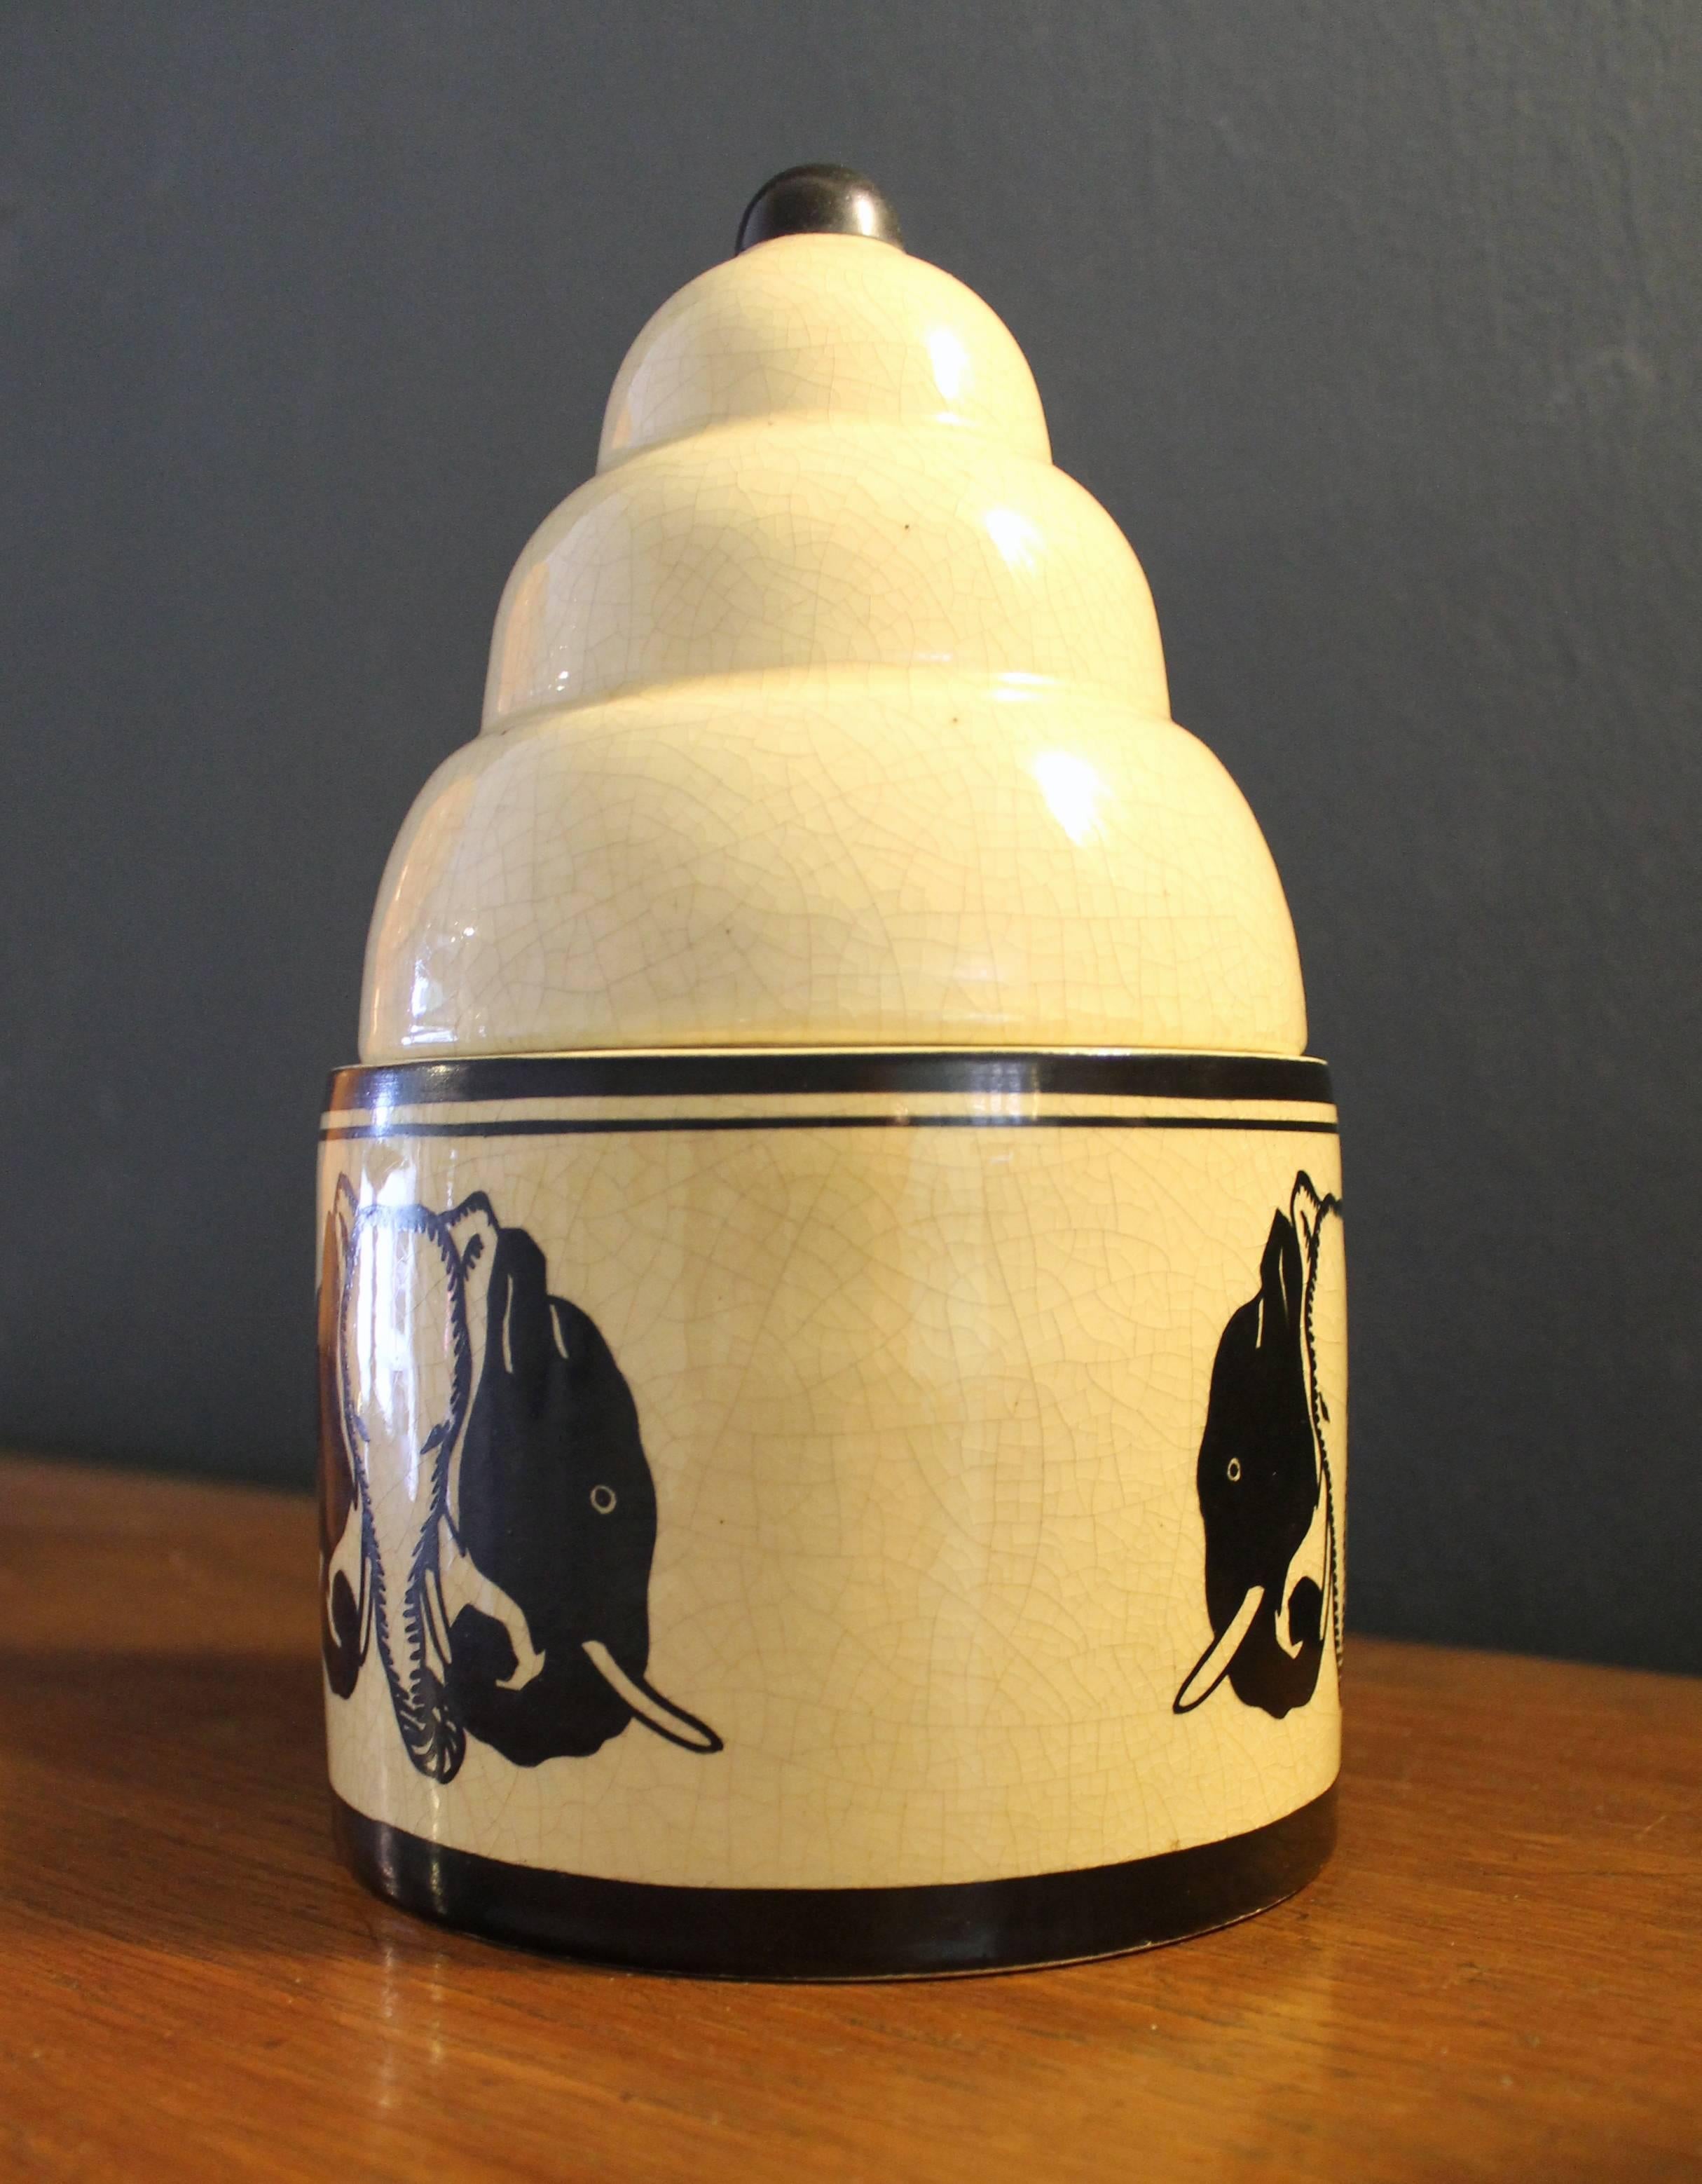 Ceramic vase by Montiéres ceramic factory, based in Amiens (in the North of France), who had a very short story of production (1917/1933).
This Art Deco vase is part of Samara series.